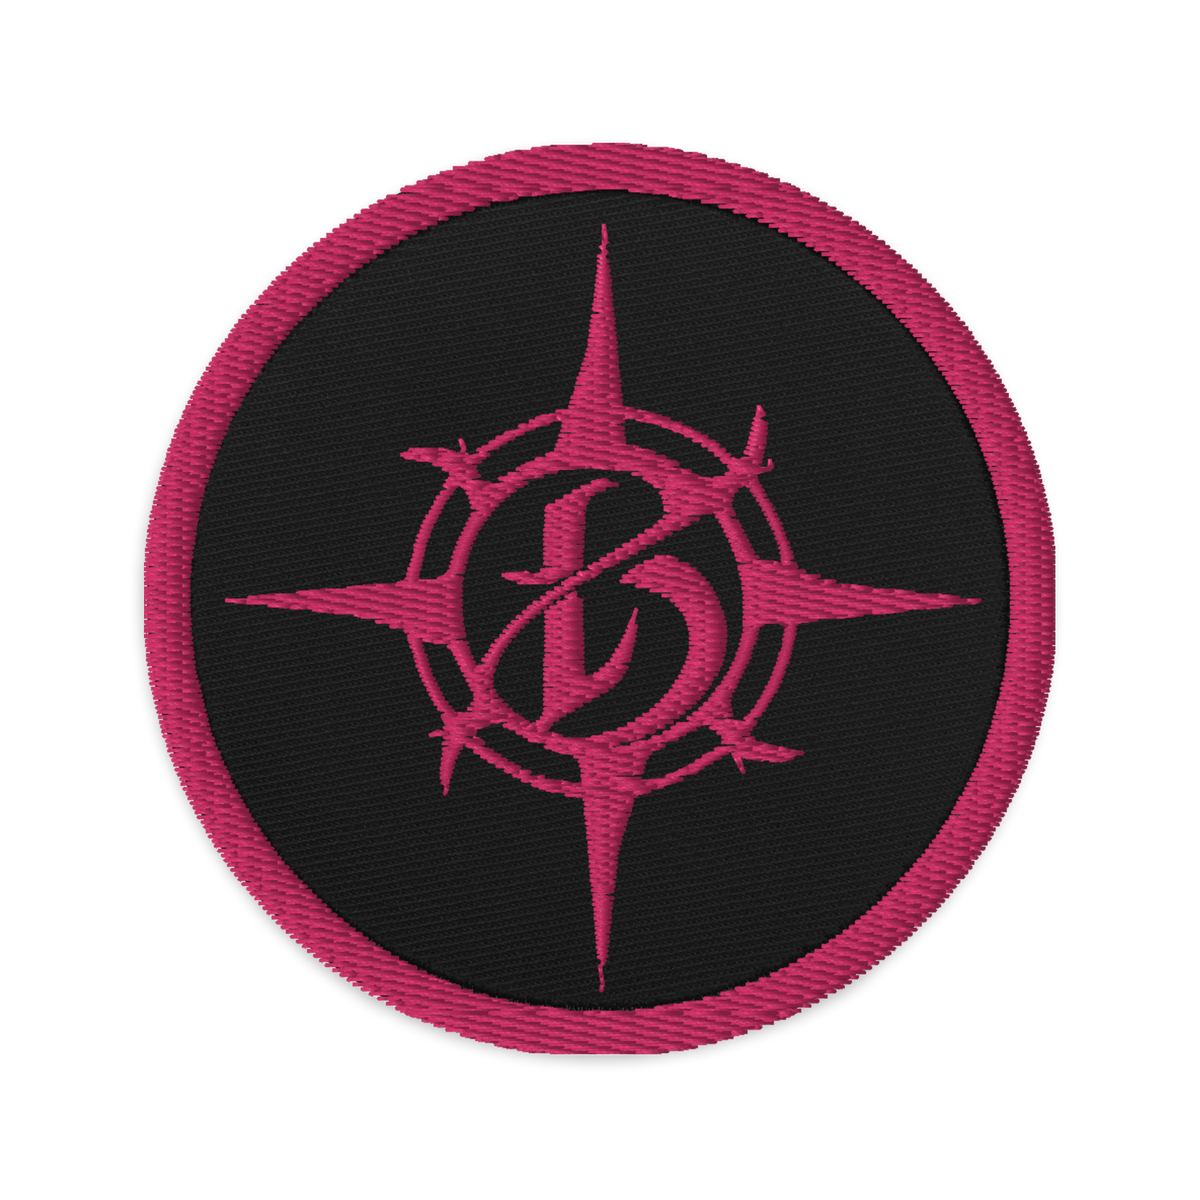 Borealis Compass Logo Embroidered Patch - Hot Pink